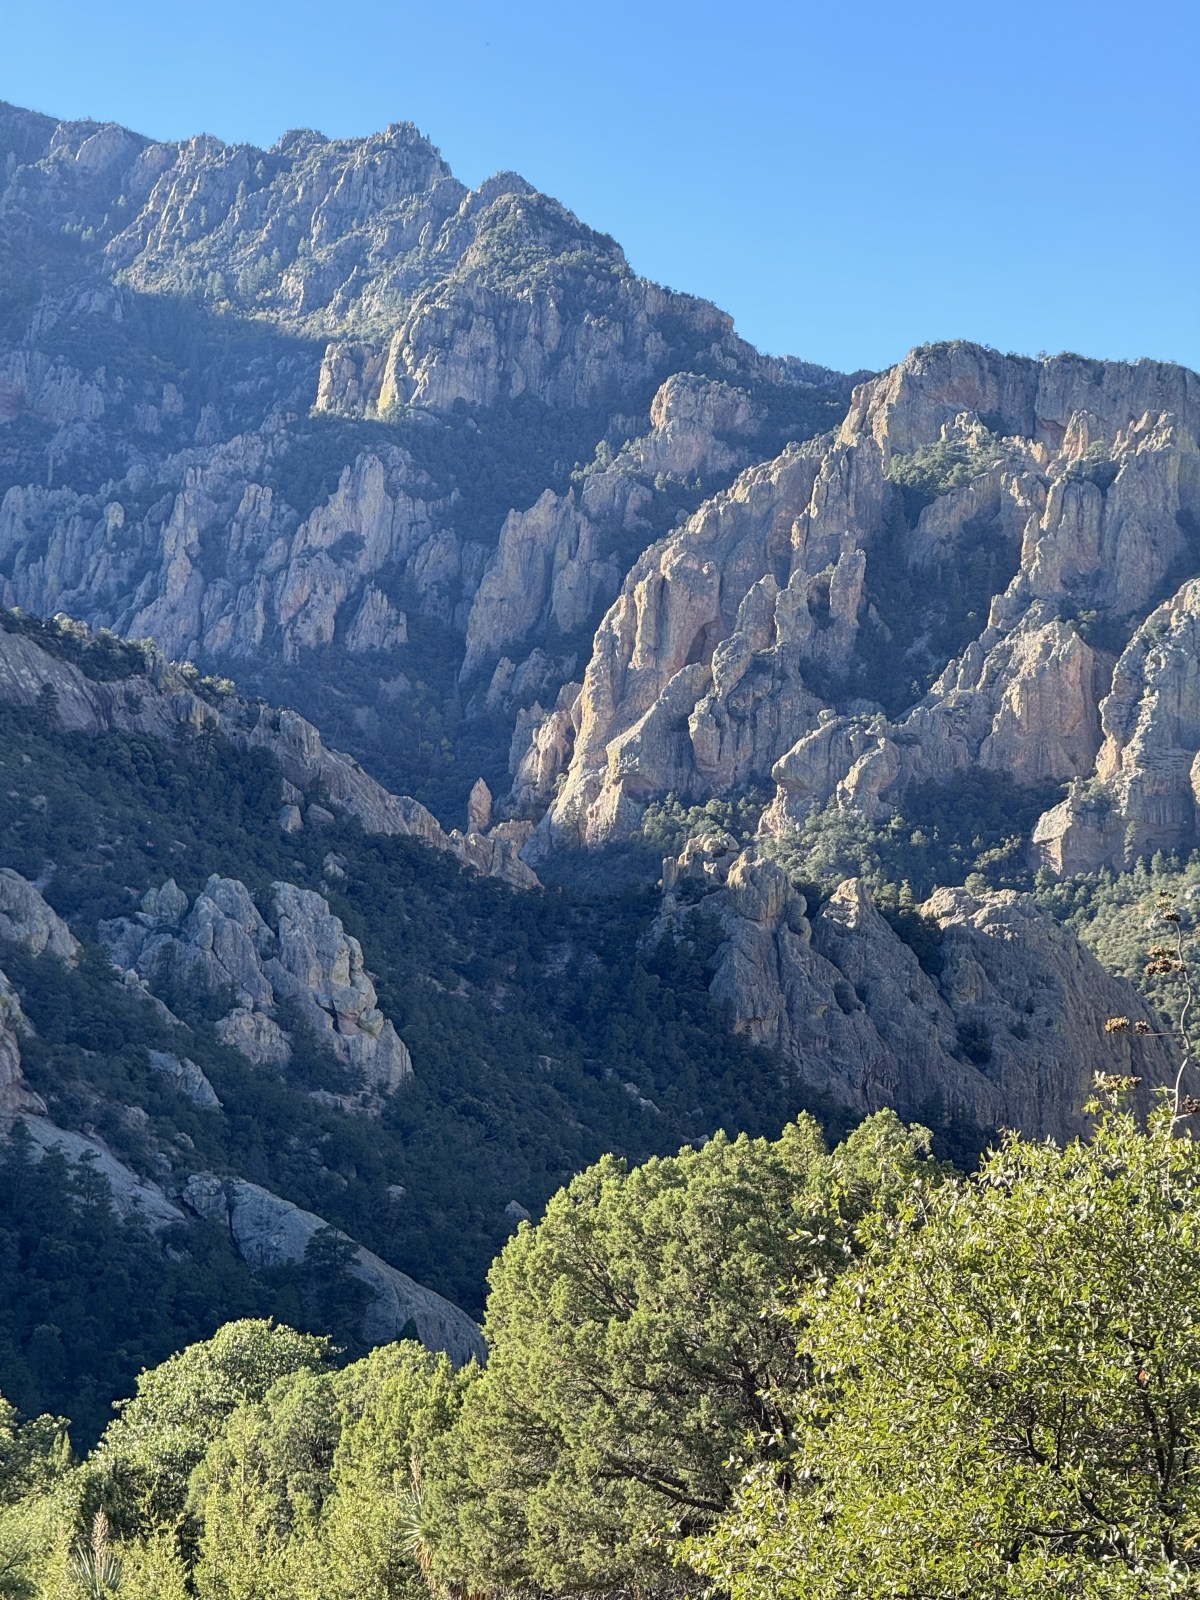 Silver Peak Trail at Cave Creek Canyon in the Chiricahua Mountains of Coronado National Forest in Portal, Arizona